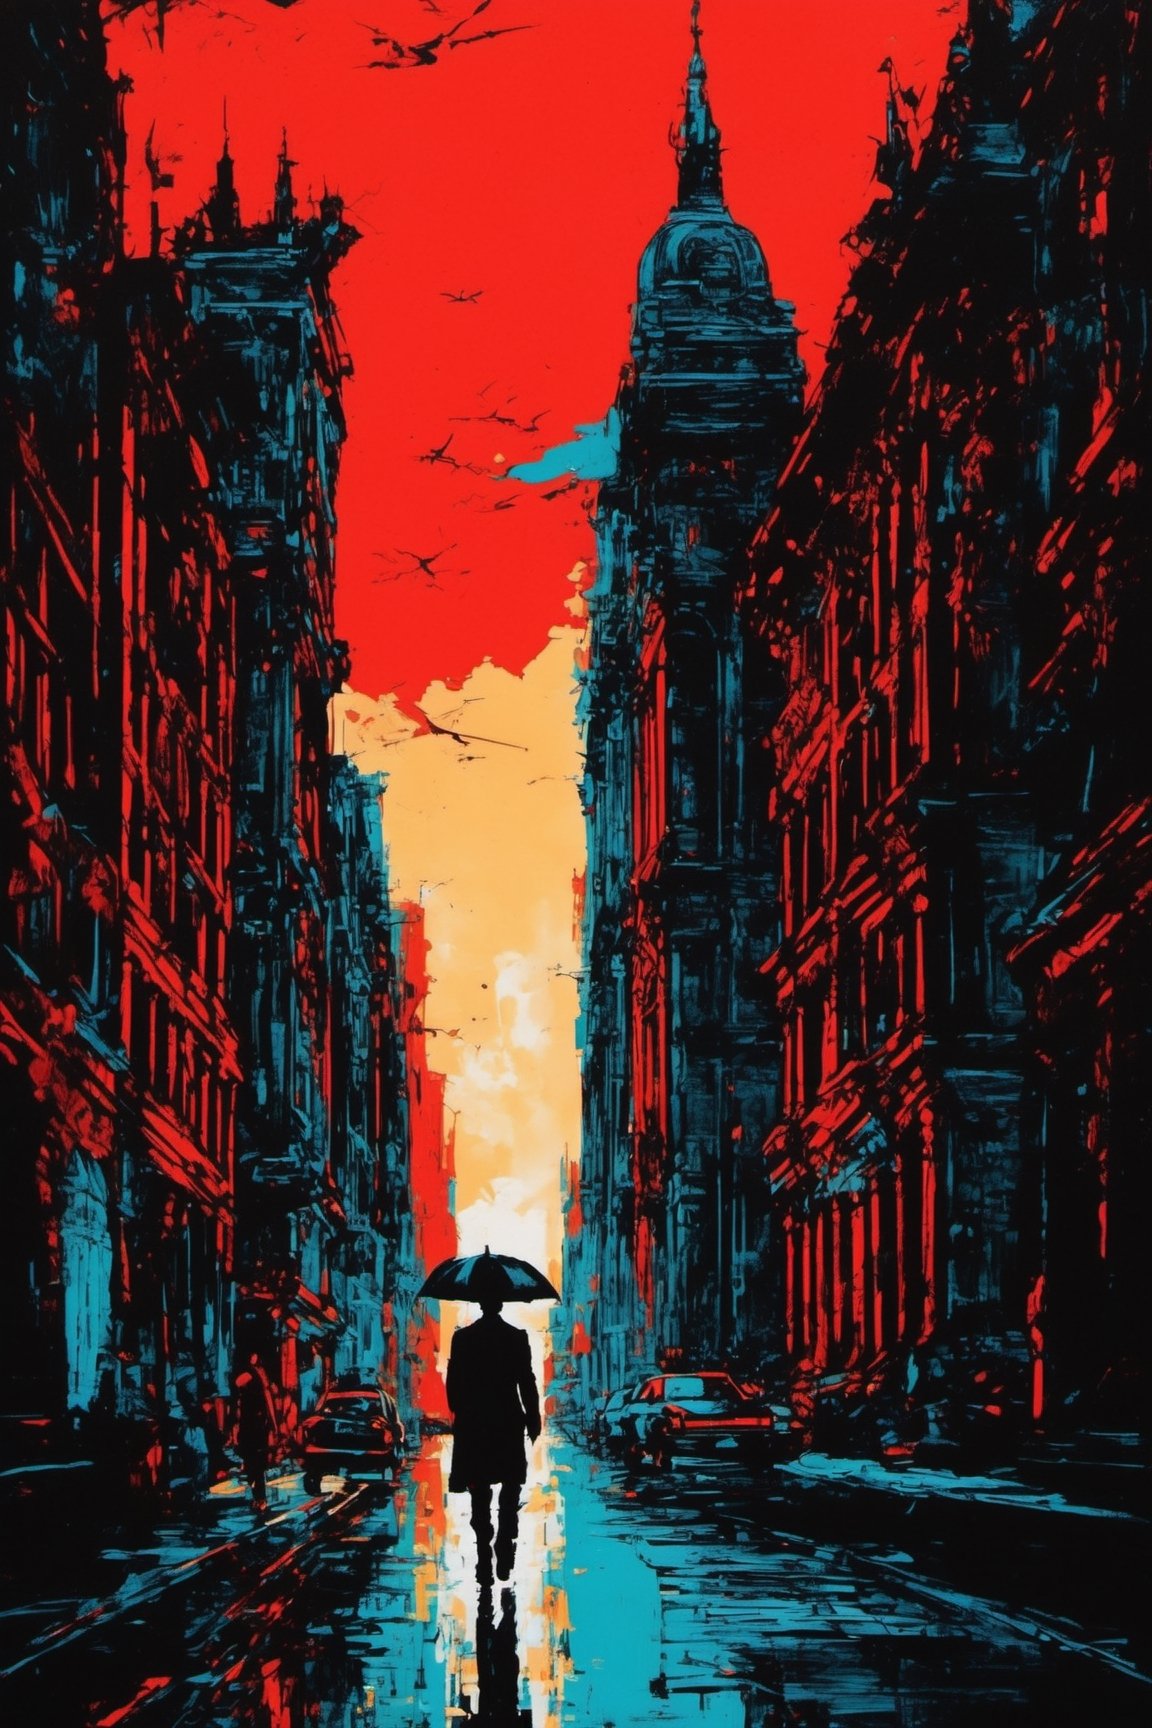 ((masterpiece), (best quality), (highly detailed)), A person with a confident stride walks past a towering building. The scene is rendered in the style of silkscreen, with dark black and red tones creating a striking visual contrast. The person and the building are portrayed with photographically detailed portraitures, capturing every intricate detail. The atmosphere of the scene is enhanced by the use of lithograph technique, with light cyan and black hues adding depth and dimension. The overall aesthetic is reminiscent of manapunk, evoking a sense of futuristic and fantastical elements. This scene would be ideal for a poster, showcasing the elaborate artwork and unique style. 